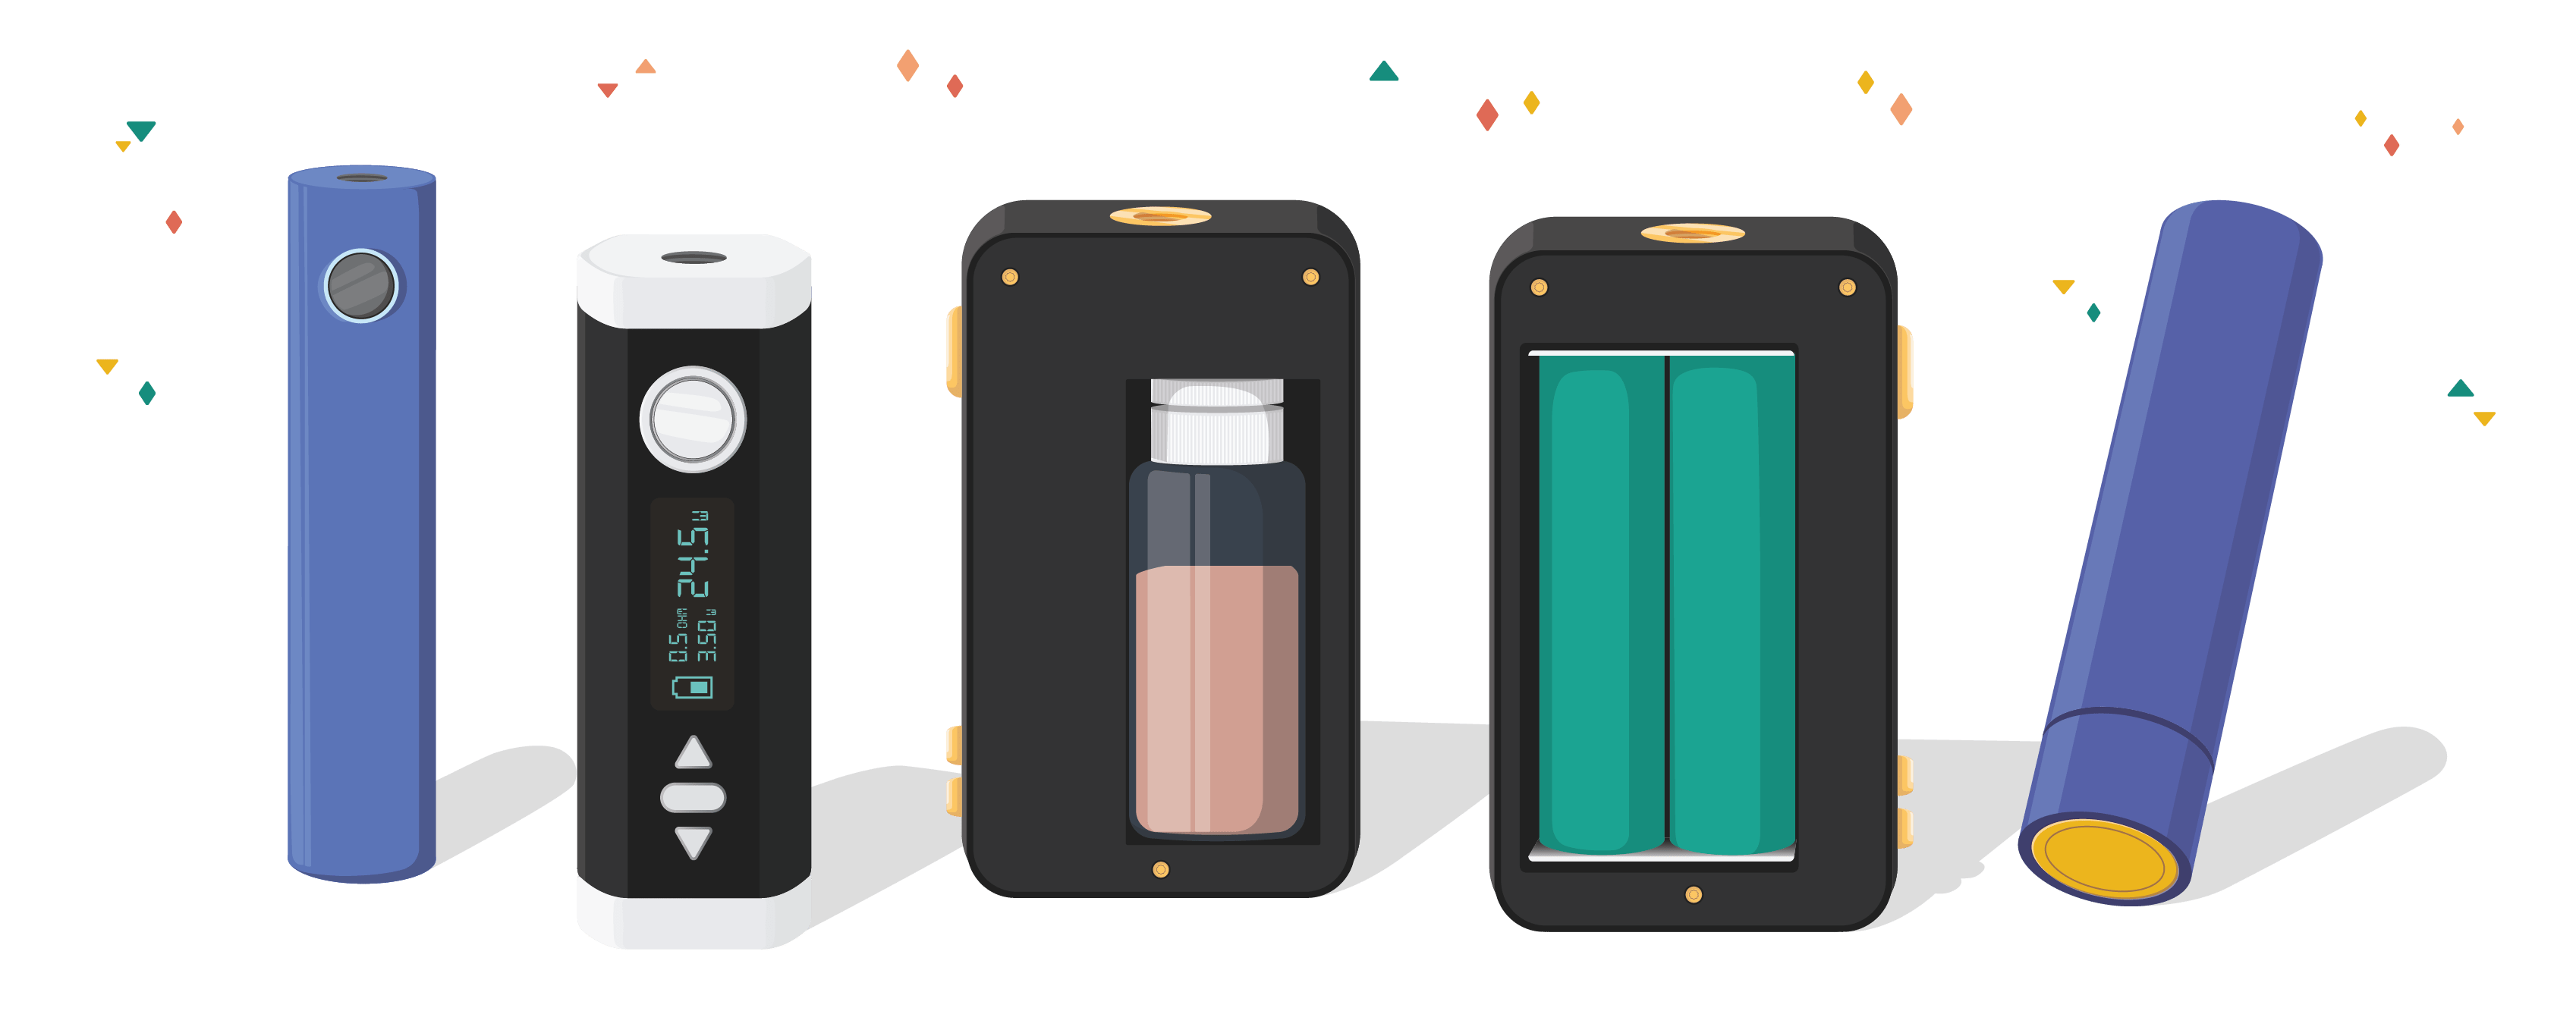 https://www.cigaretteelec.fr/themes/starship/assets/img//cms/cms-comment-choisir-batterie/batterie-family.png